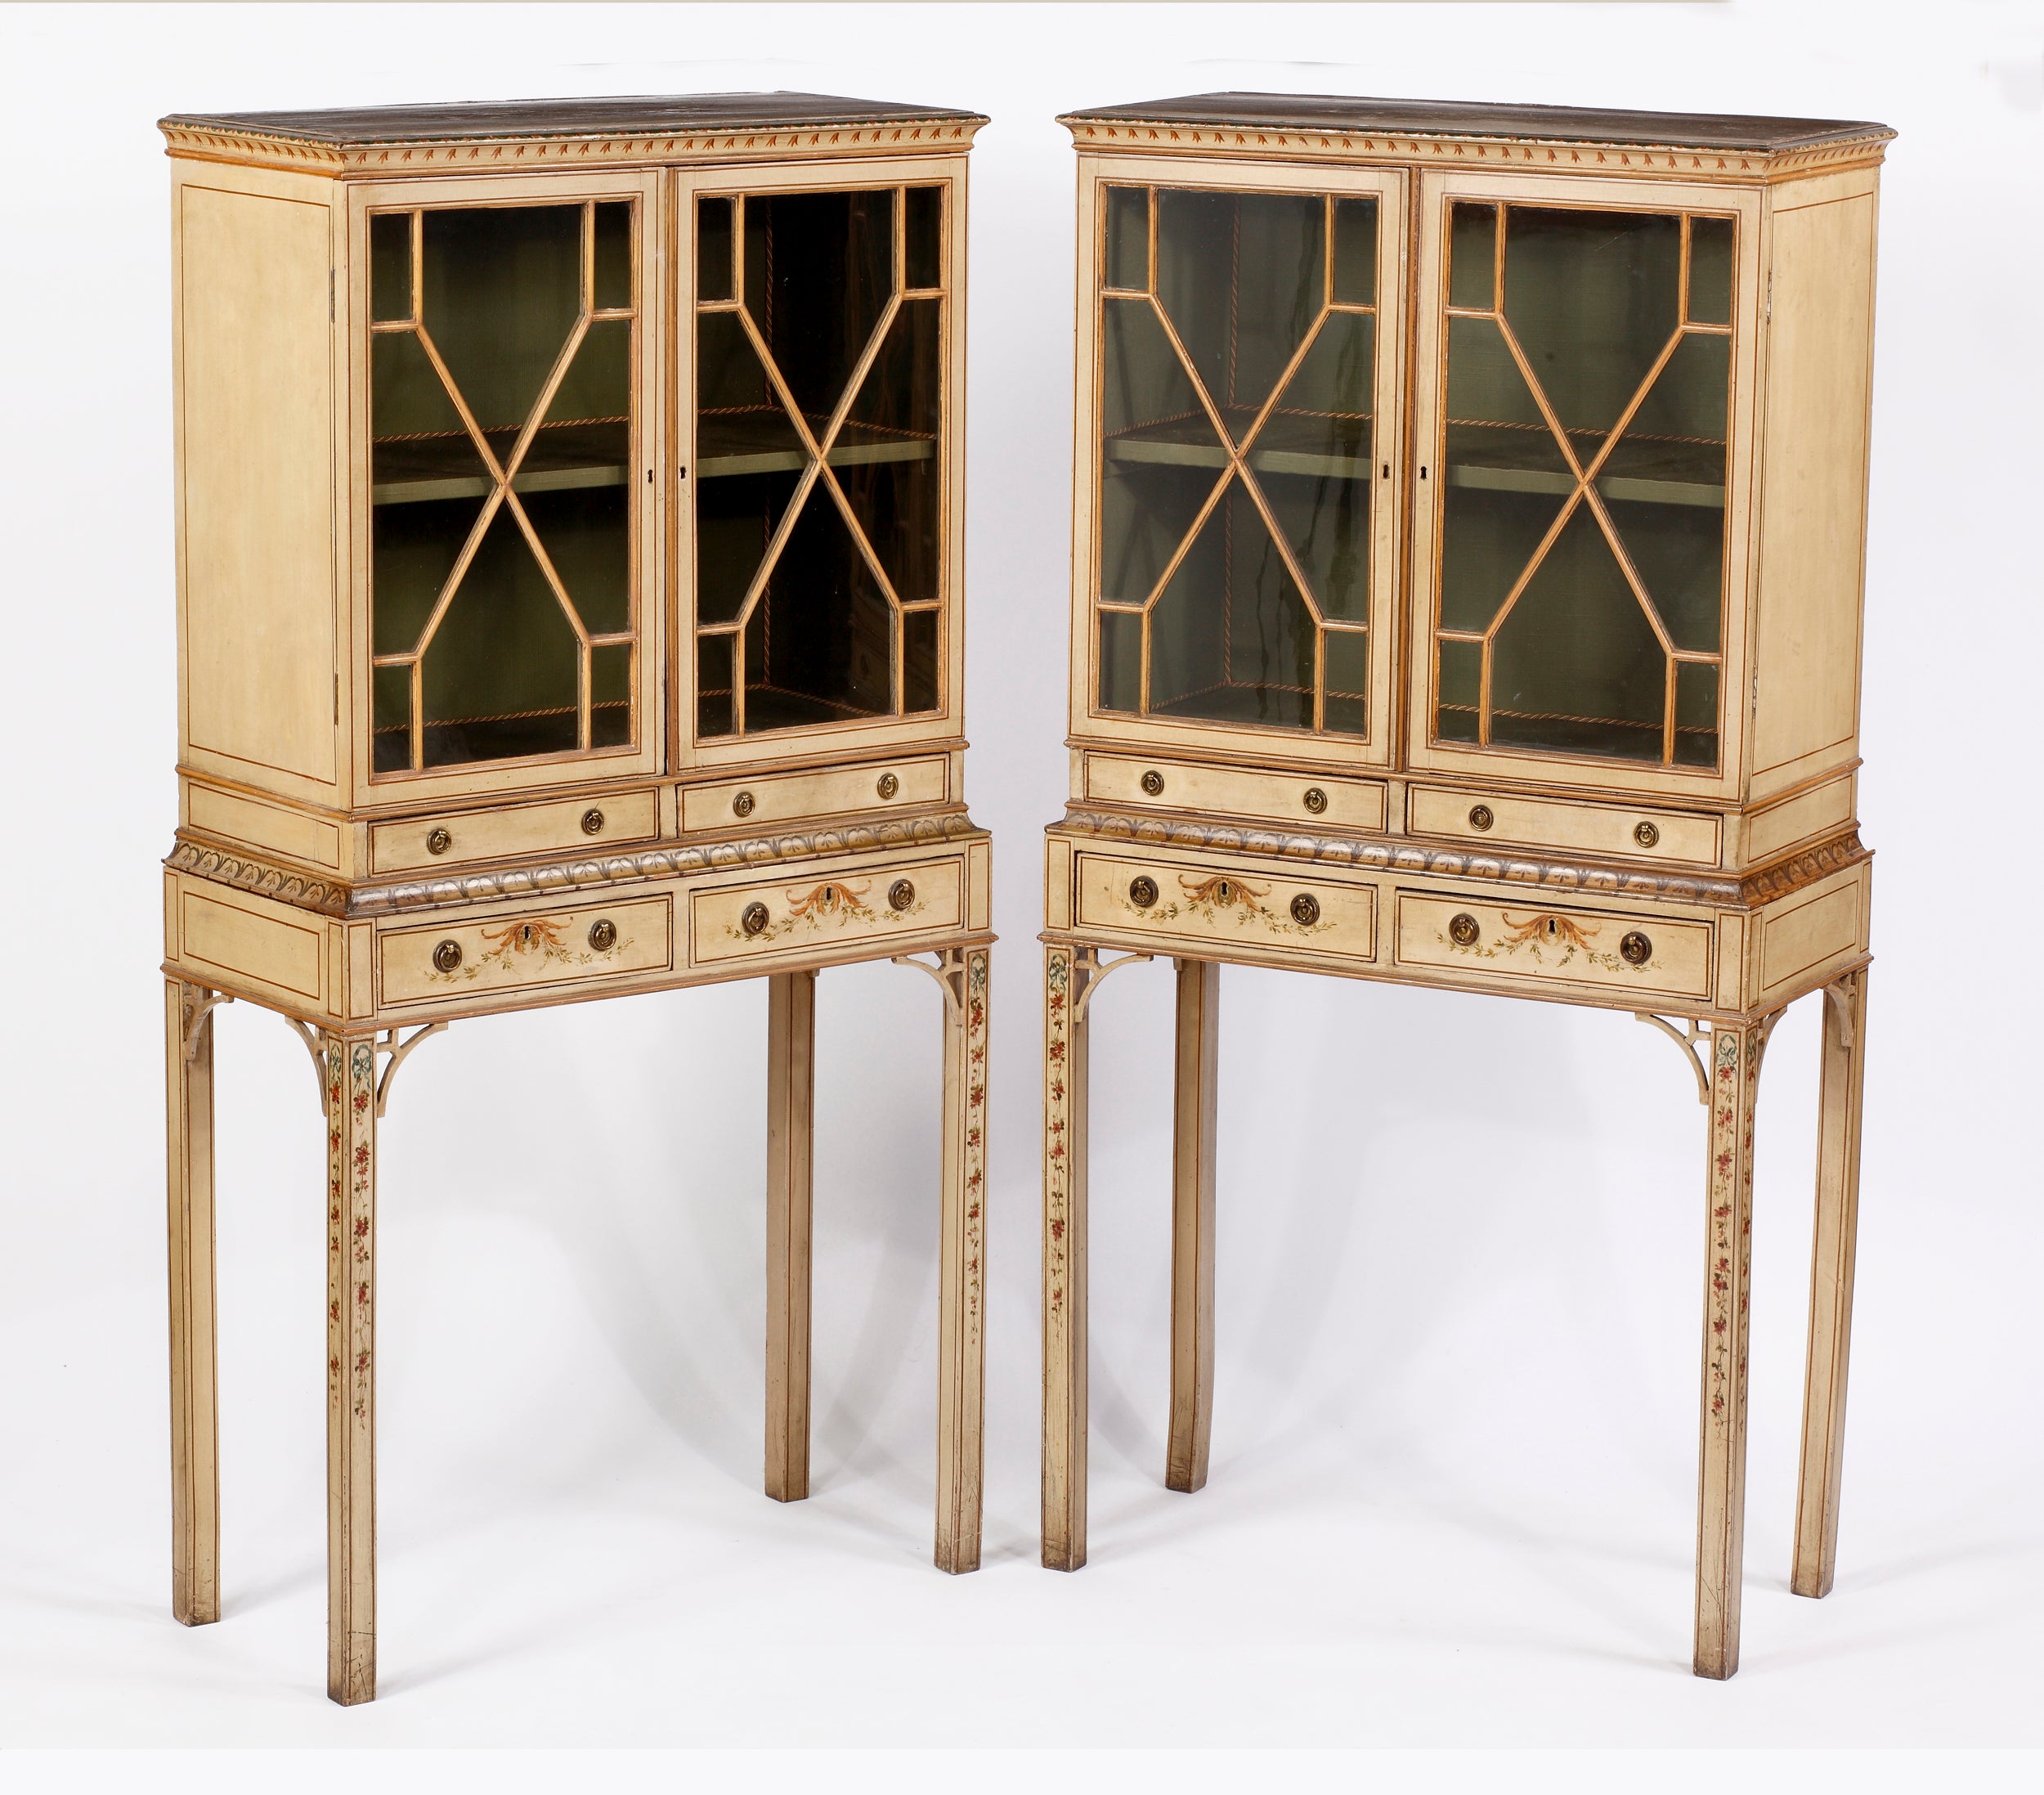 A Fine & Rare Pair of George III Painted Diminuitive Cabinets on Stands For Sale